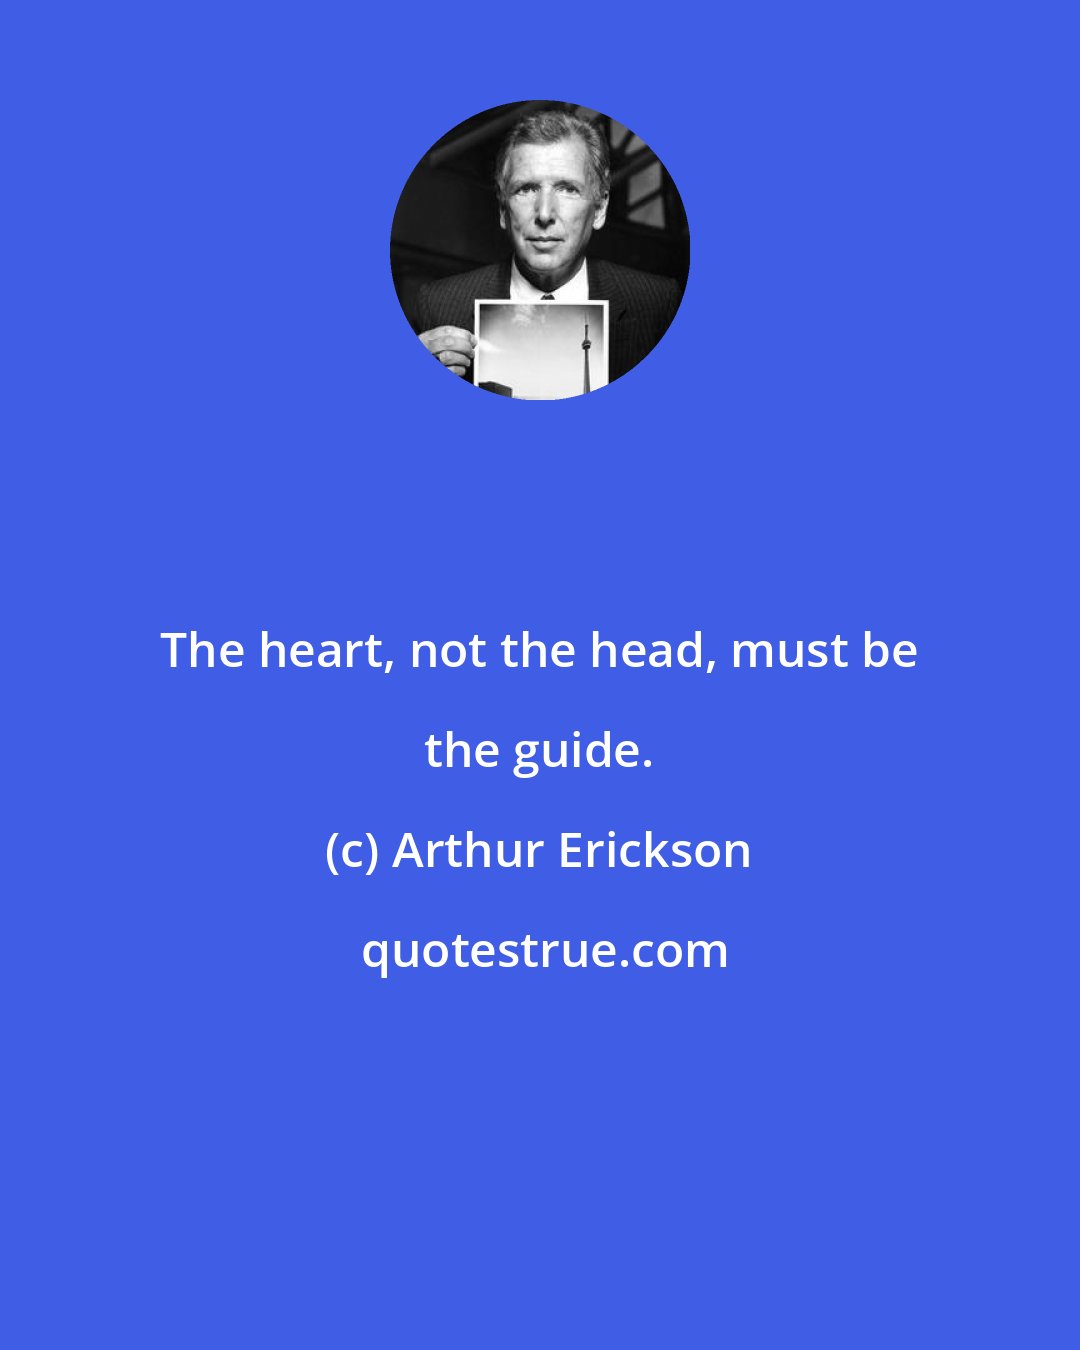 Arthur Erickson: The heart, not the head, must be the guide.